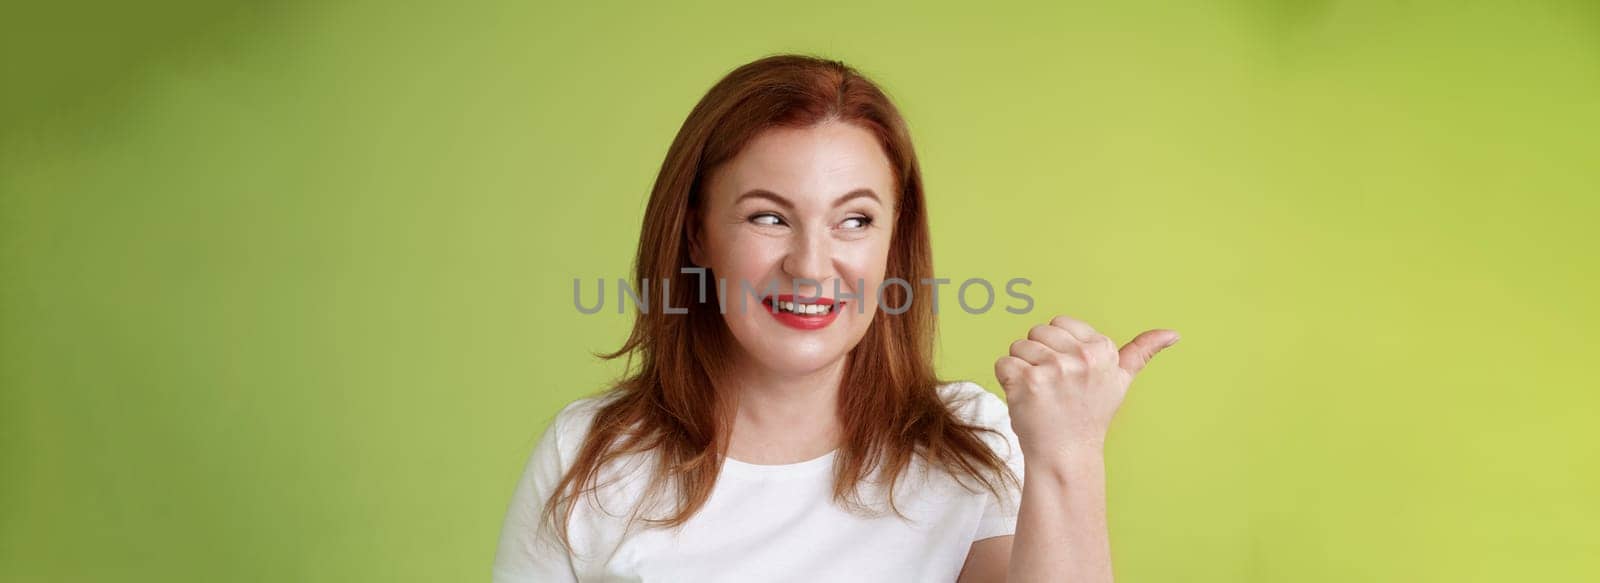 Intrigued charismatic redhead middle-aged woman smiling temtation interest pointing looking left curiously check-out cool promo share awesome place location stand green background by Benzoix